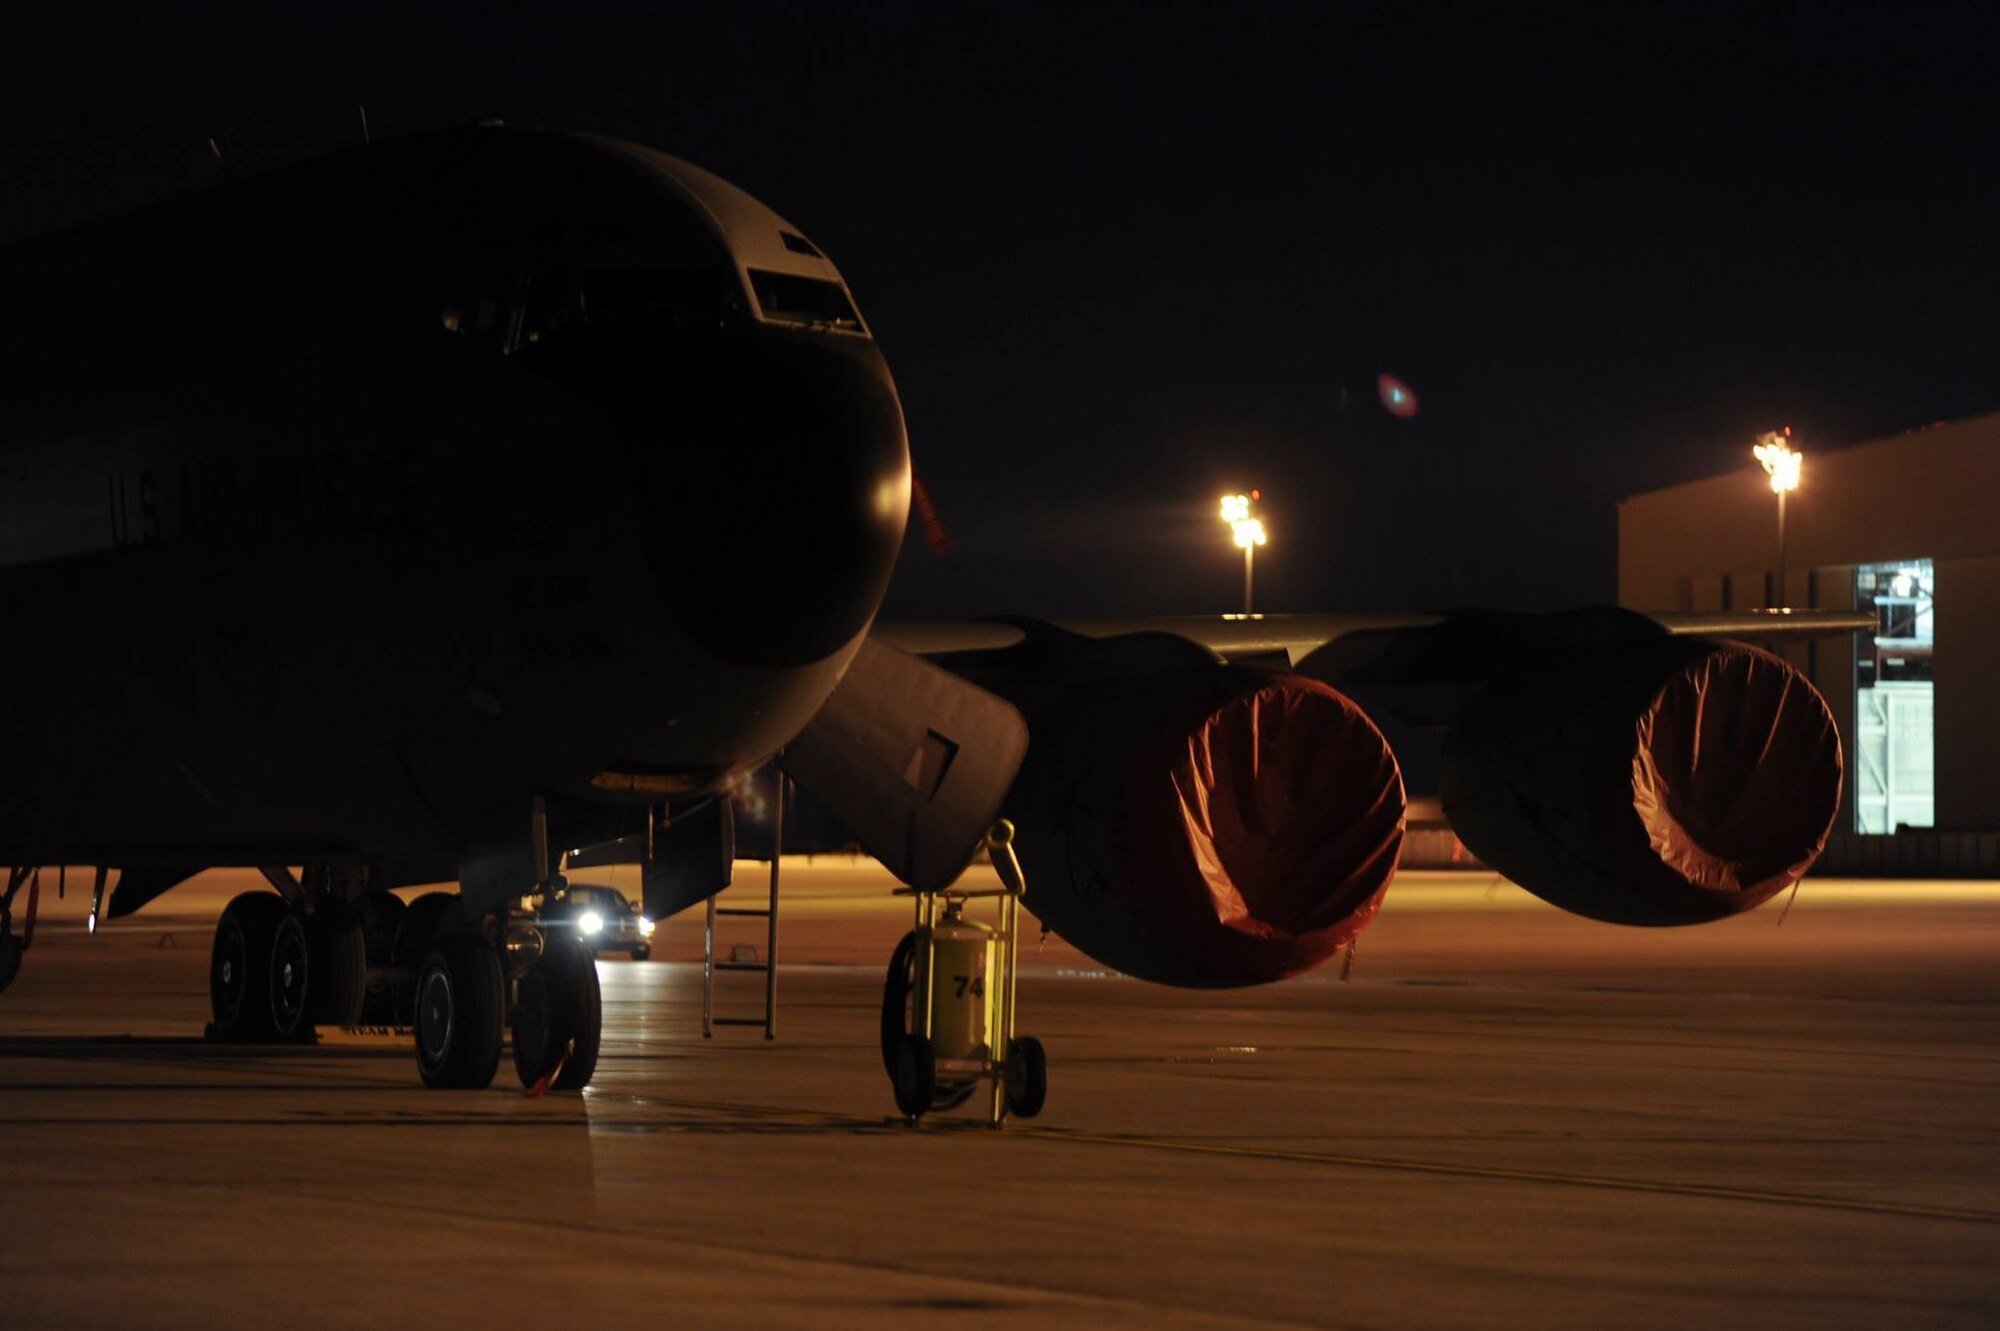 A KC-135 Stratotanker sits on the flightline at McConnell Air Force Base, Kan., June 16, 2016. The KC-135 is the backbone of aerial refueling, and McConnell is the U.S. Air Force's premiere air refueling base with more Stratotankers than any other base. (U.S. Air Force photos/Airman 1st Class Josh Crawley)